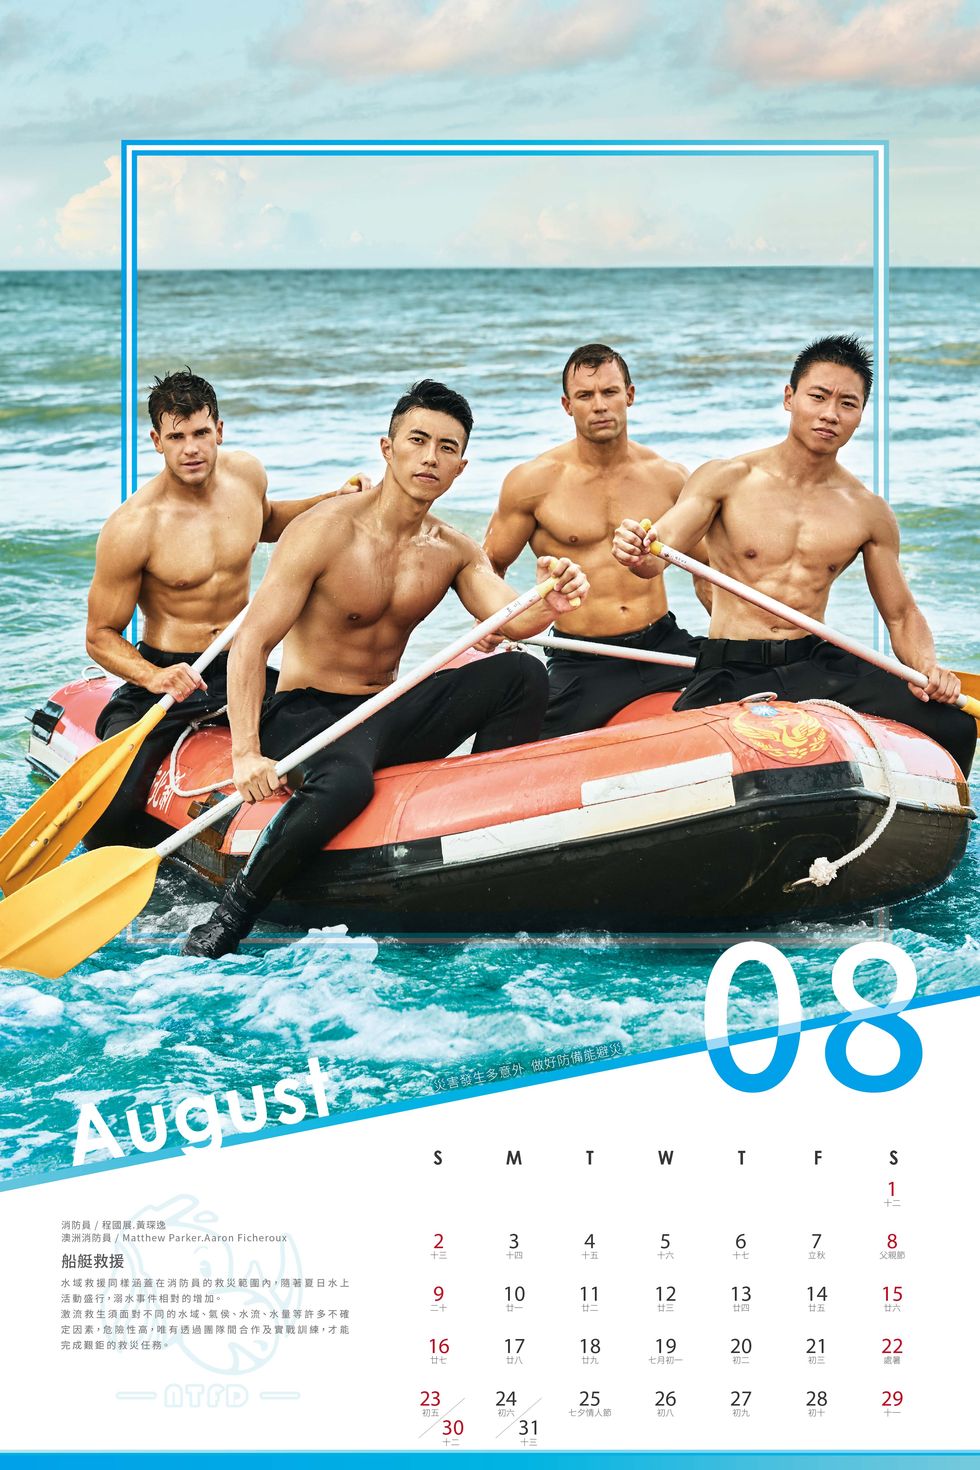 Leisure, Fun, Vacation, Recreation, Vehicle, Boating, Poster, Water transportation, Inflatable boat, Muscle, 